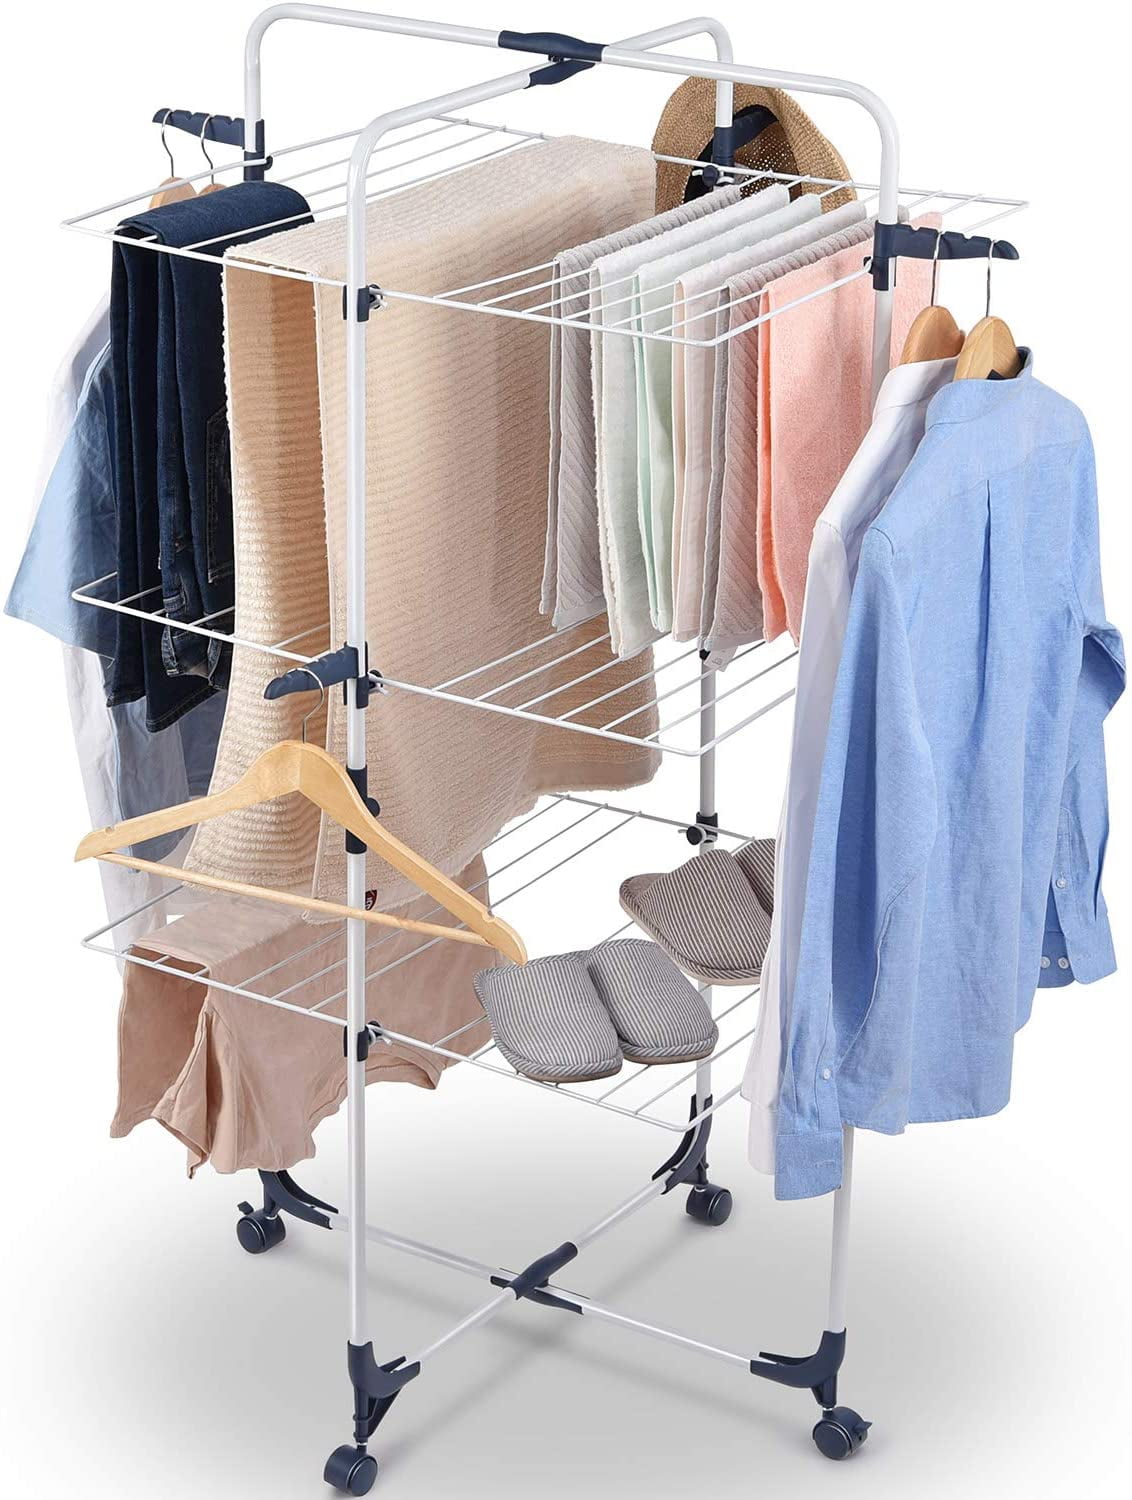 Clothes Shoes Drying Rack Laundry Stand Folding Hanger Dryer  Portable  A L 